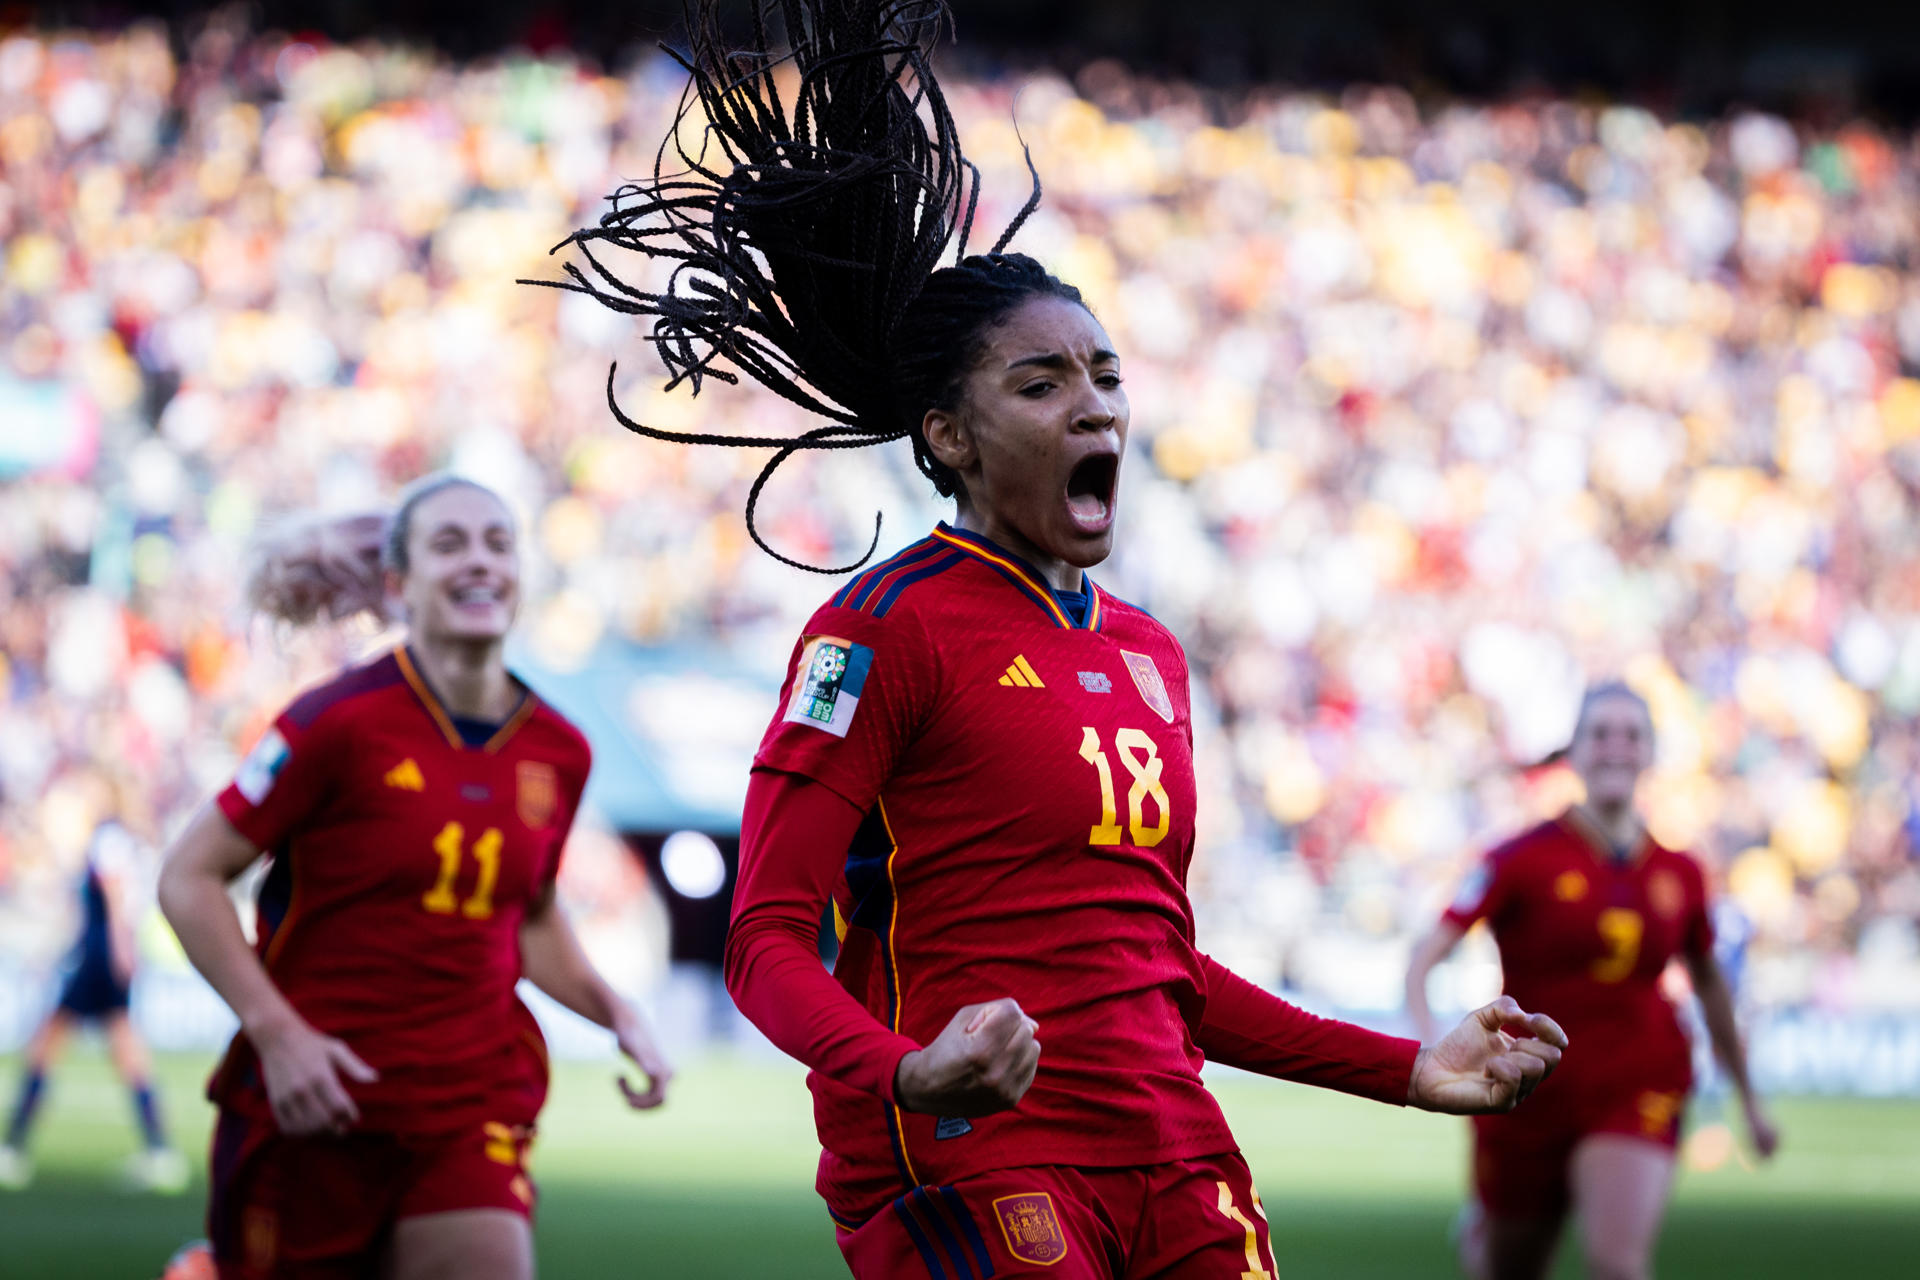 Spain's Salma Paralluelo celebrates after scoring against the Netherlands during the Women's World Cup quaterfinal in Wellington, New Zealand. EFE/RFEF/EDITORIAL USE ONLY